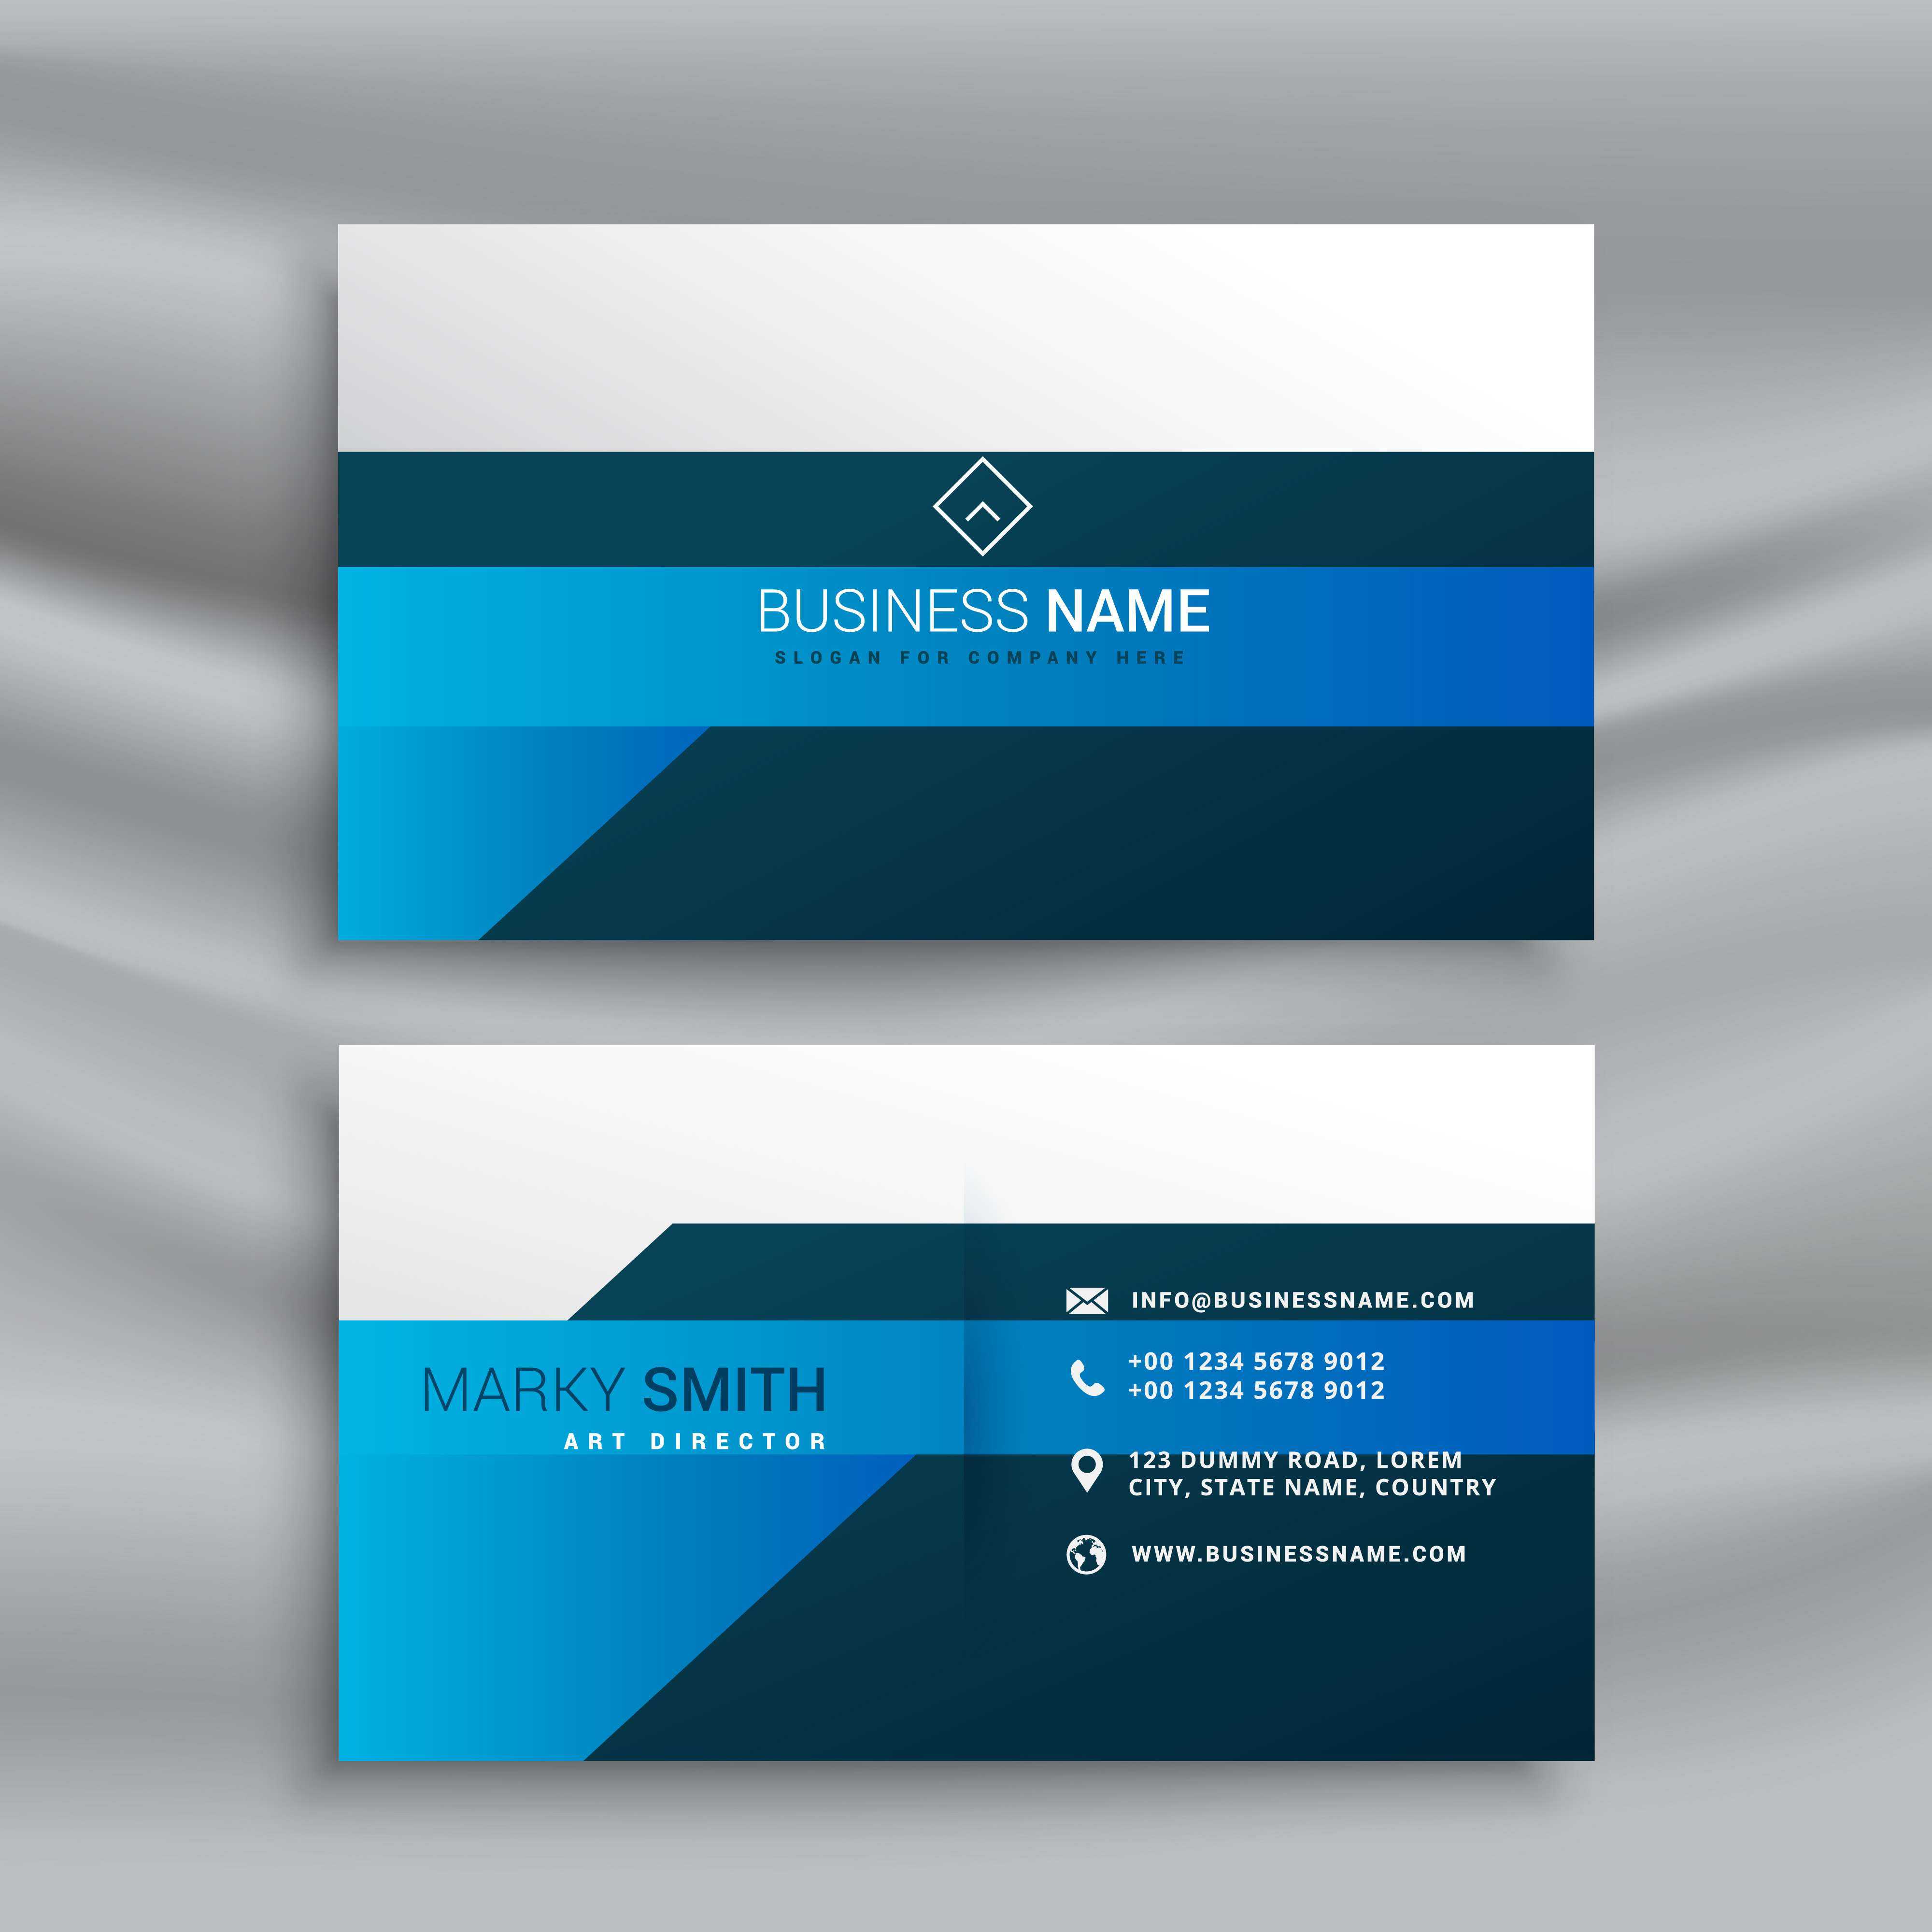 Construction Business Card Templates – Caquetapositivo Throughout Construction Business Card Templates Download Free